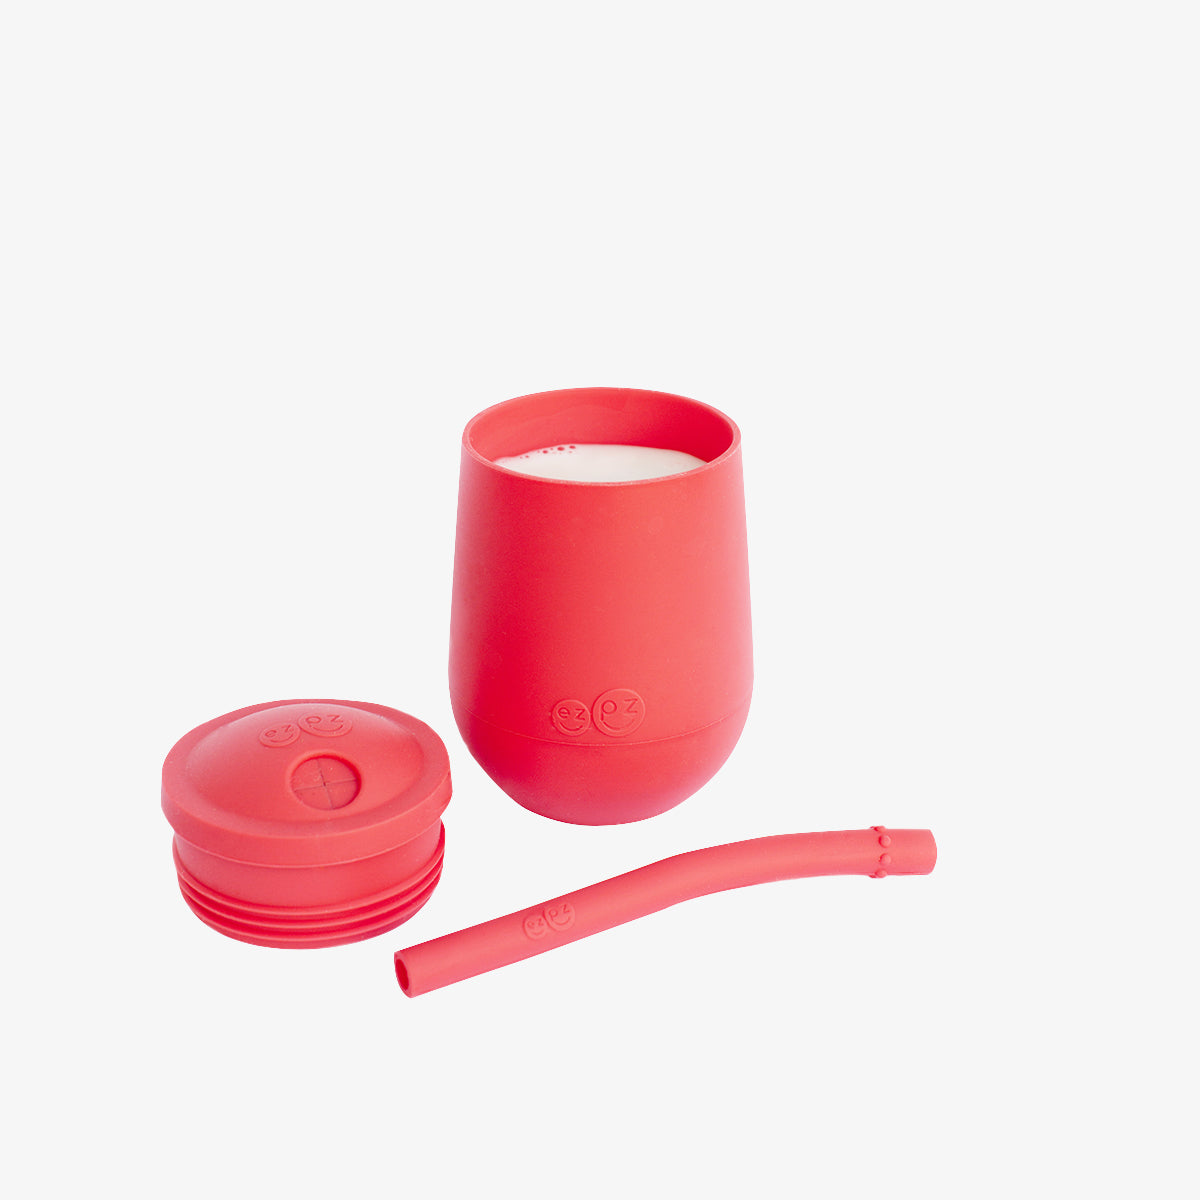 The Mini Cup + Straw in Coral by ezpz / Silicone Drinking Cup and Straw Training System for Toddlers